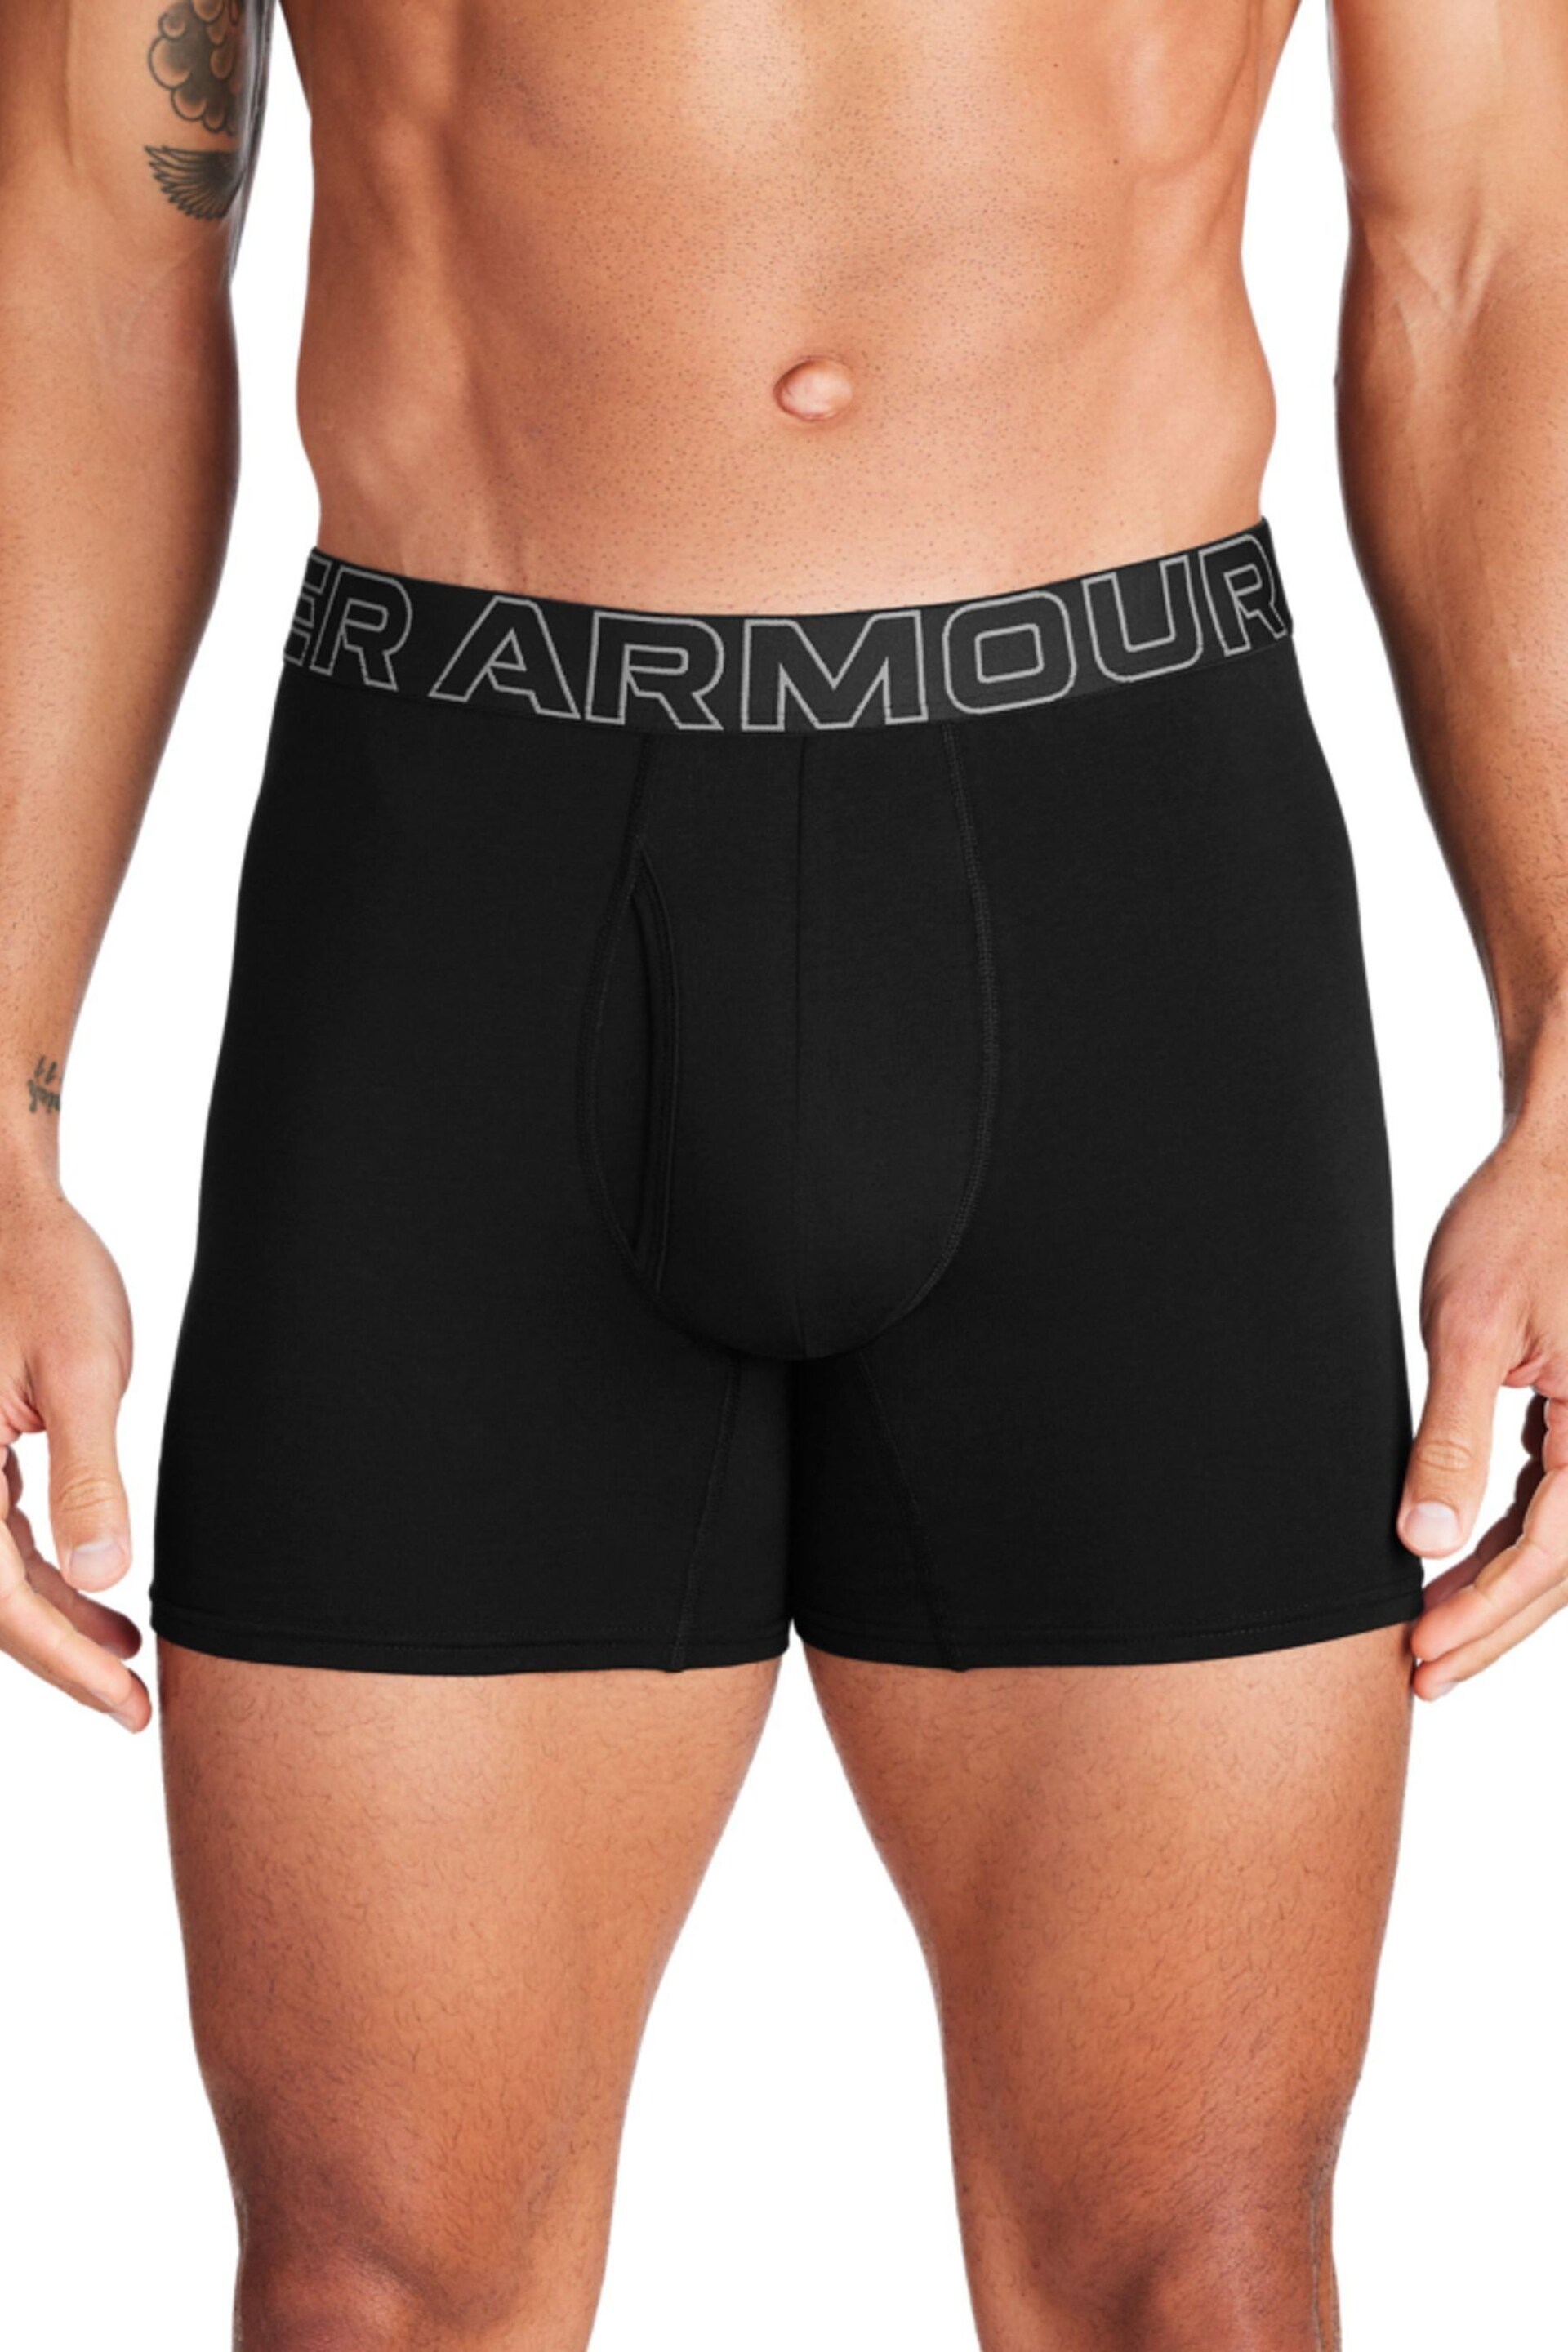 Under Armour Black 6 Inch Cotton Performance Boxers 3 Pack - Image 1 of 2